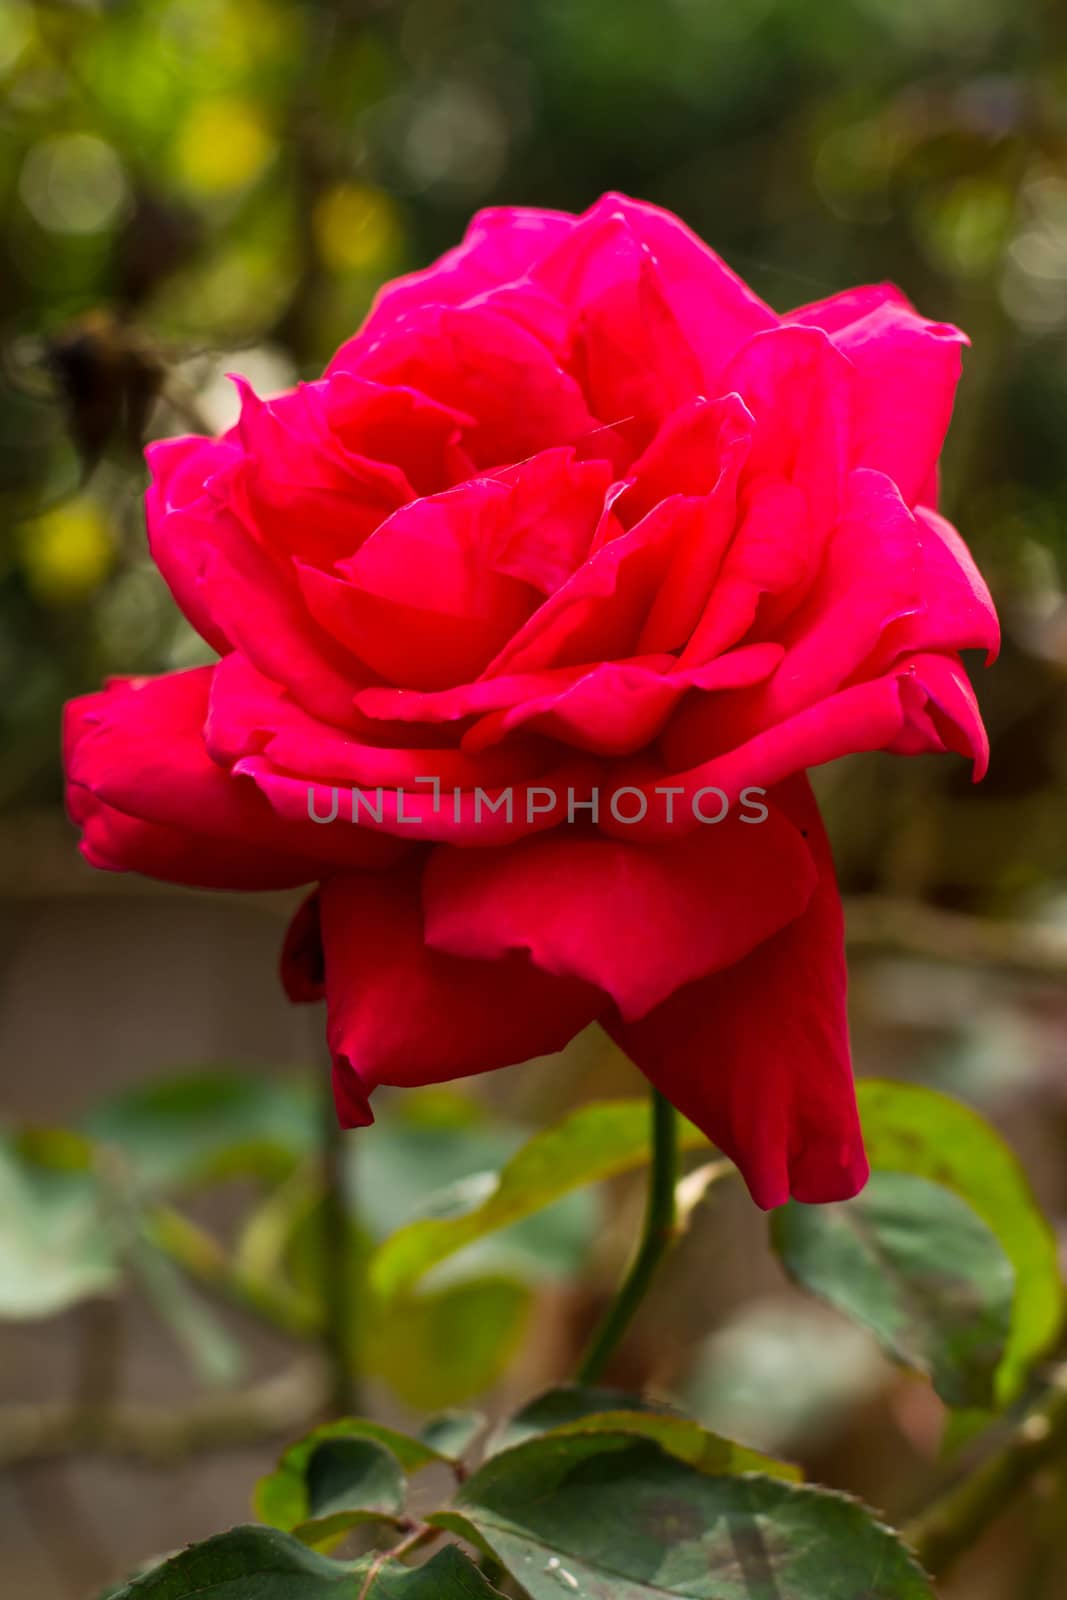 Red garden rose on nature background  by Thanamat